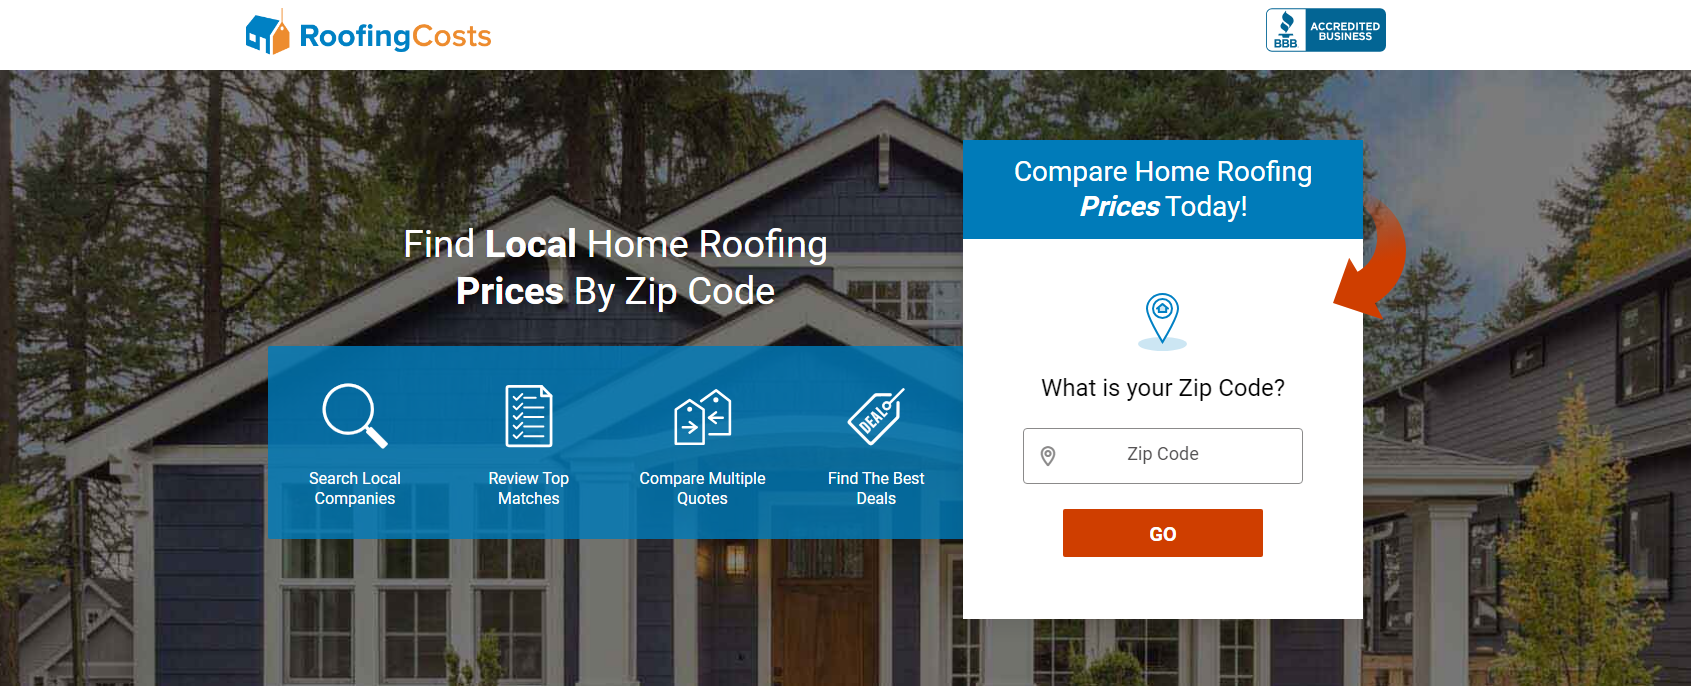 Roofing Costs banner